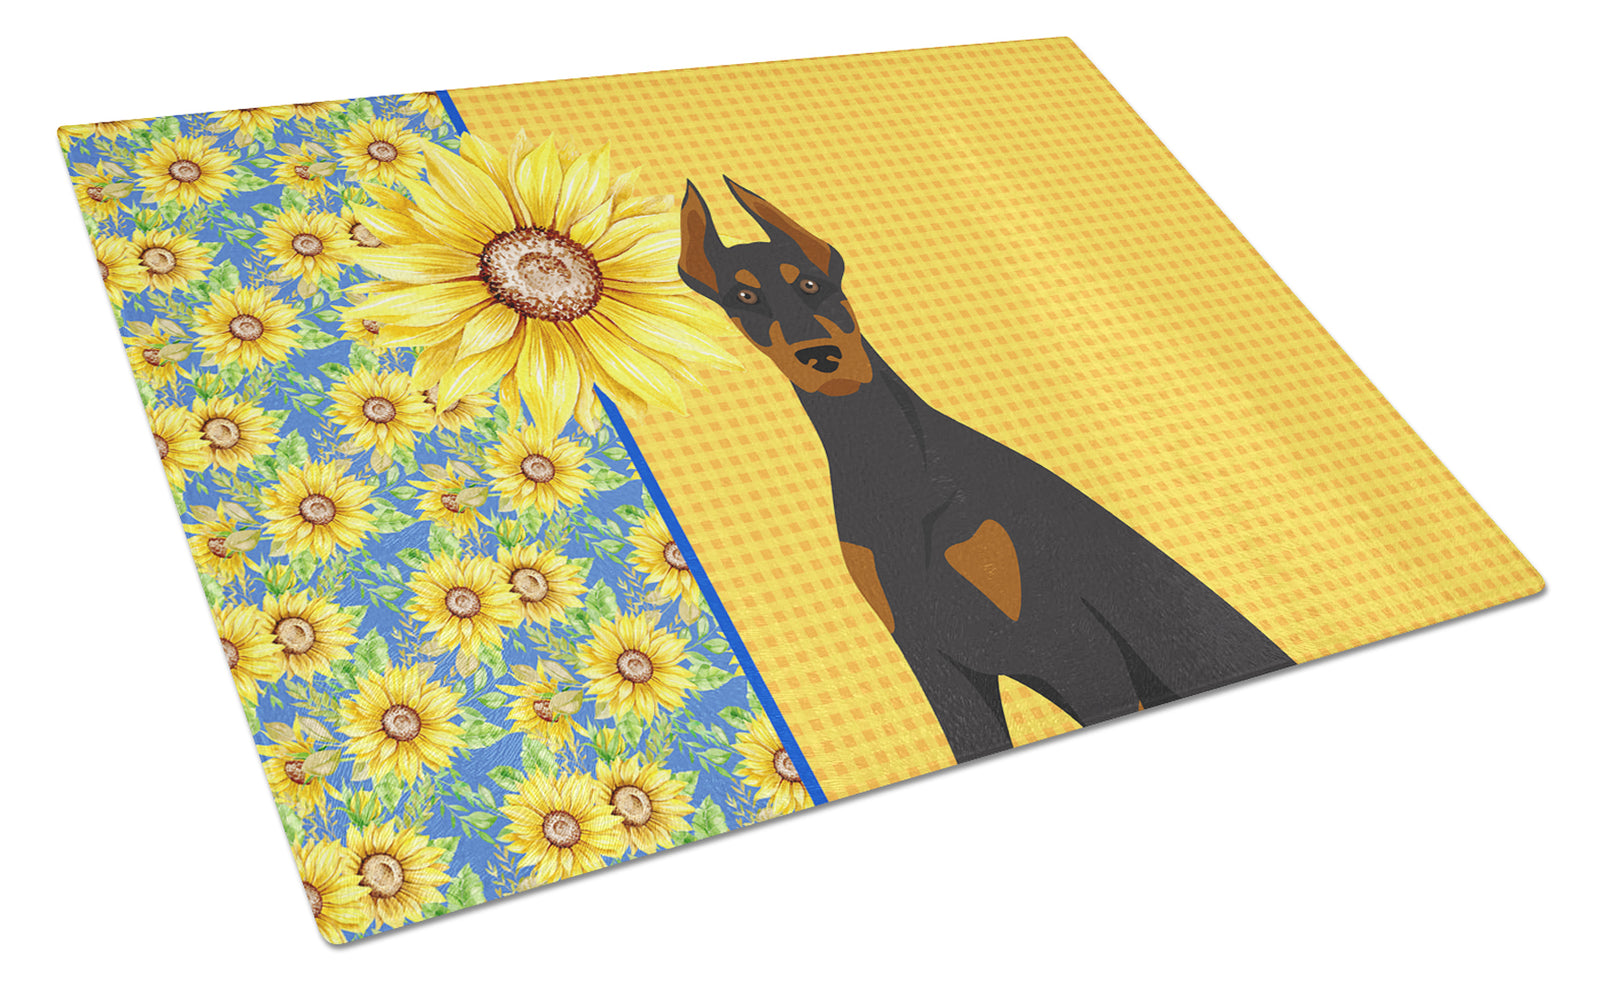 Buy this Summer Sunflowers Black and Tan Doberman Pinscher Glass Cutting Board Large